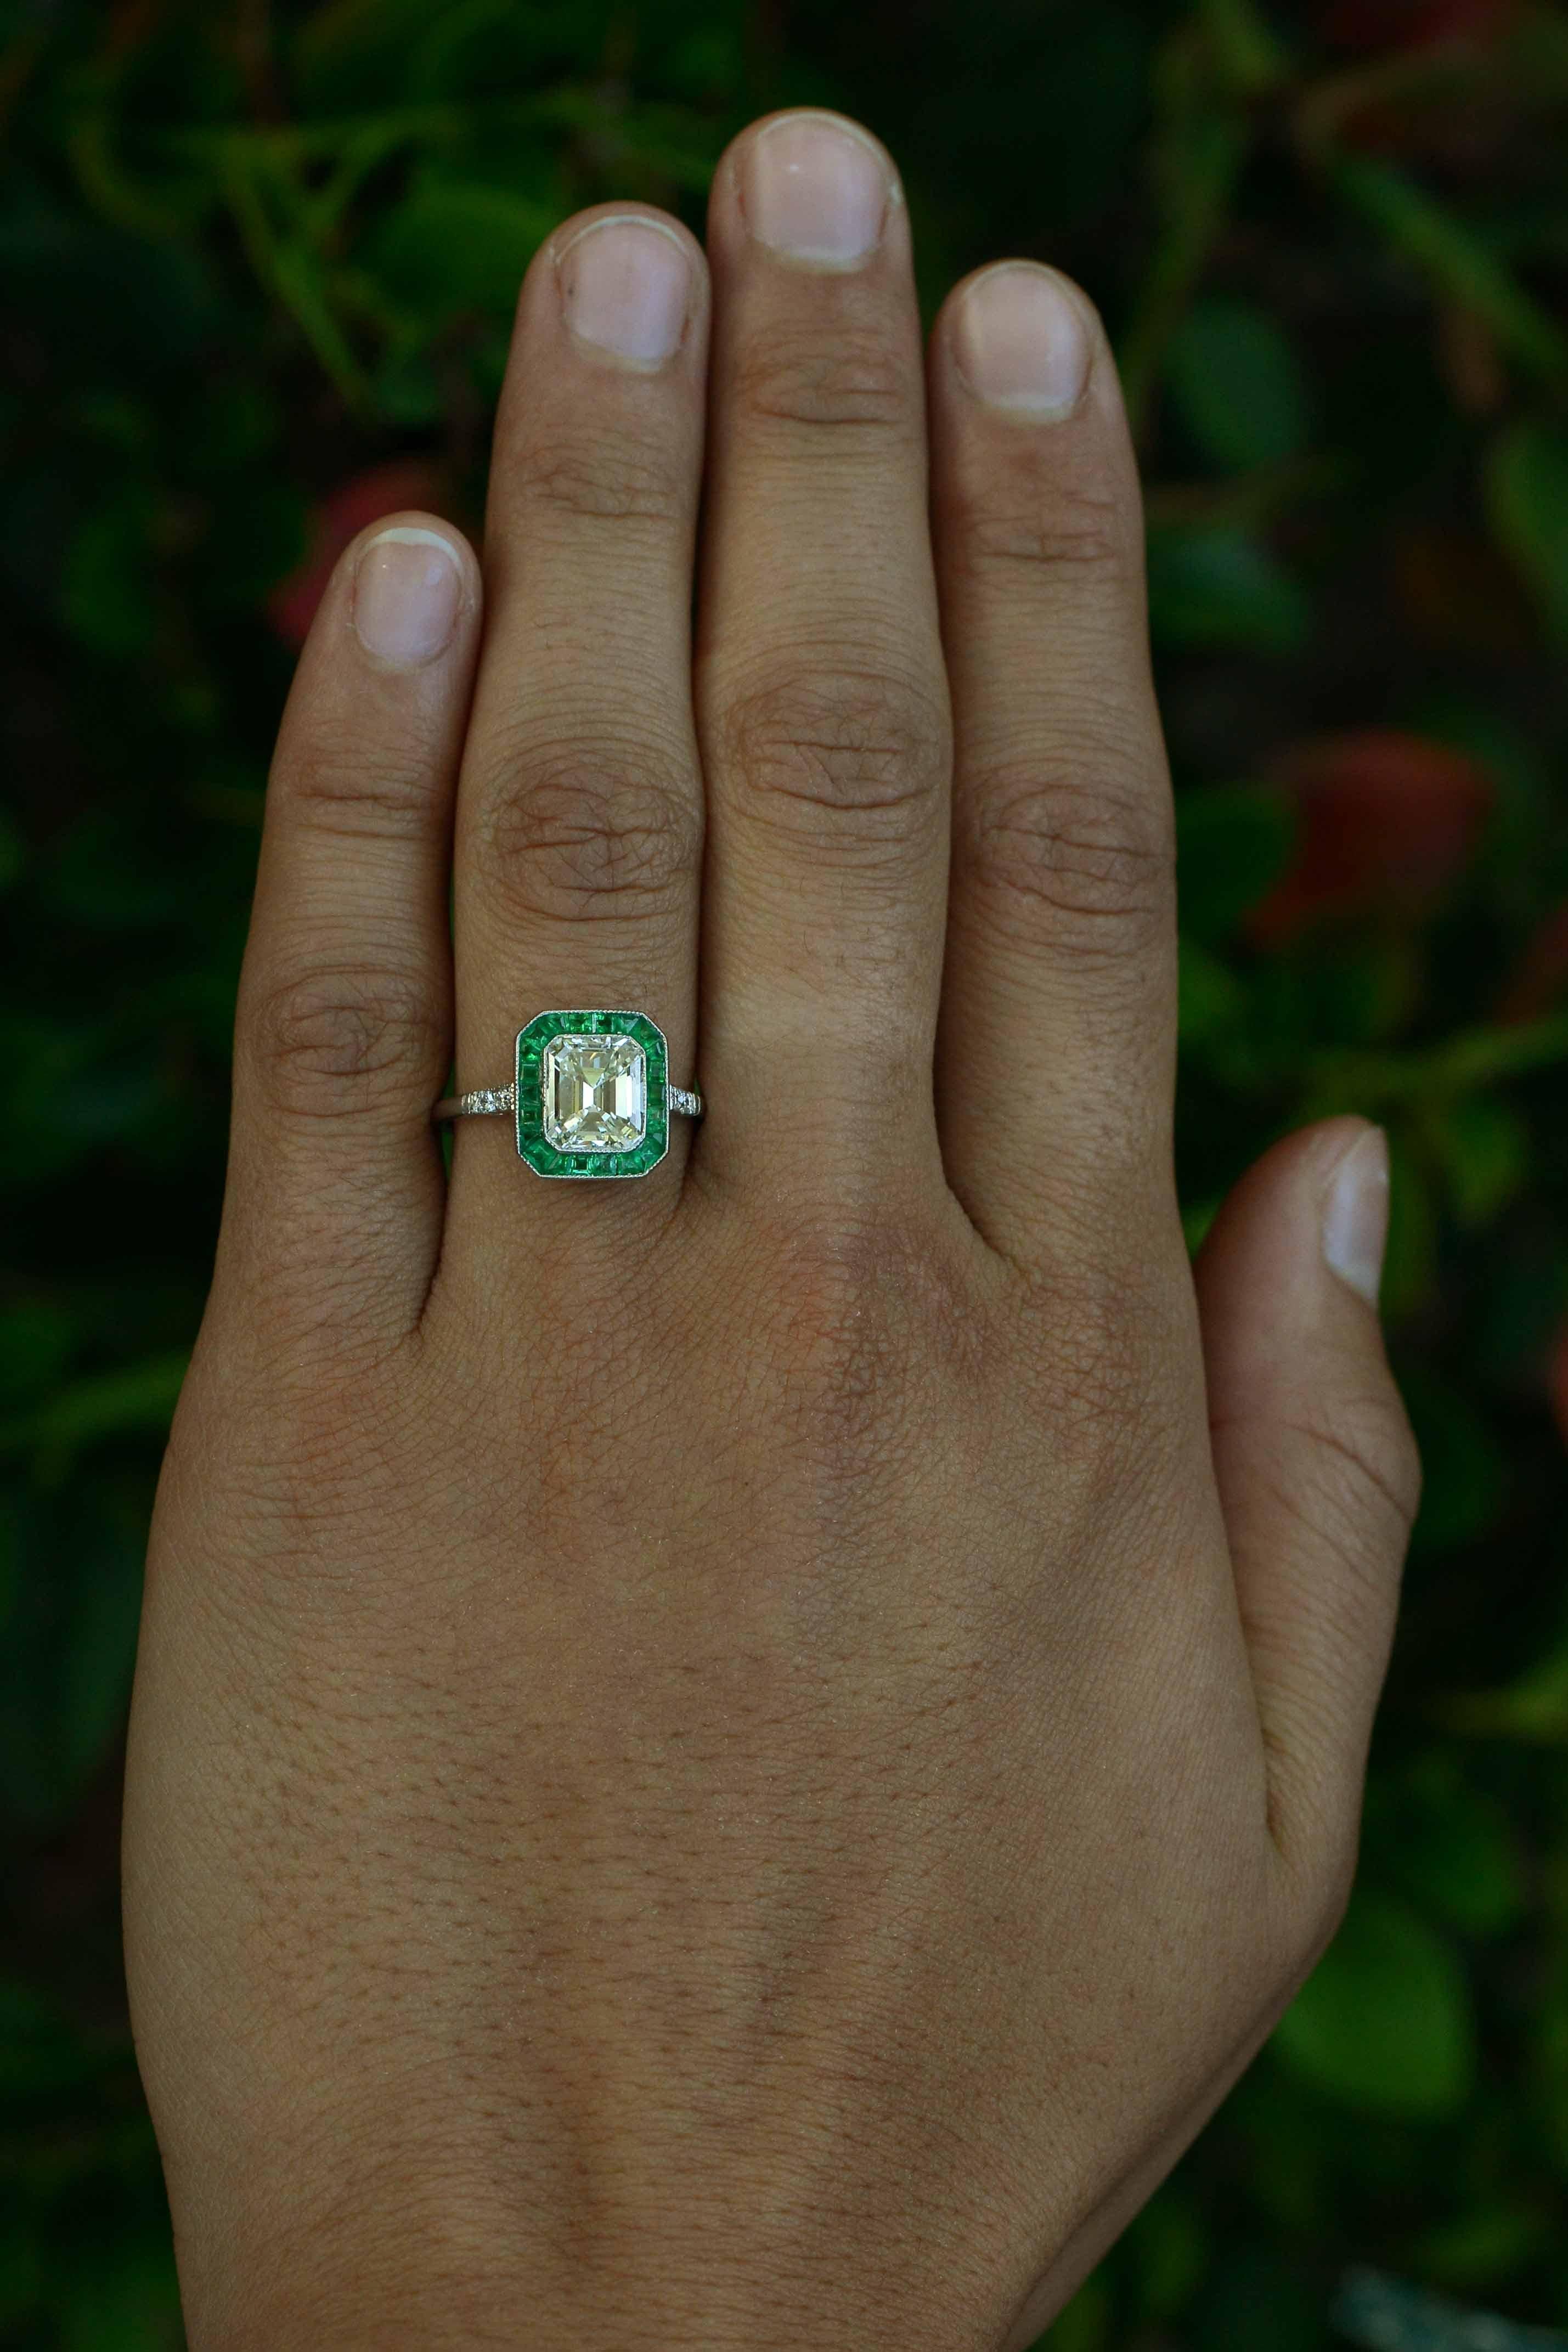 With a large and breathtaking, glittering, icy Emerald cut diamond taking center stage, the French-cut calibre' emerald halo surround really adds the wow factor. Owing to it's Art Deco heritage, this lovingly handmade platinum  engagement ring has